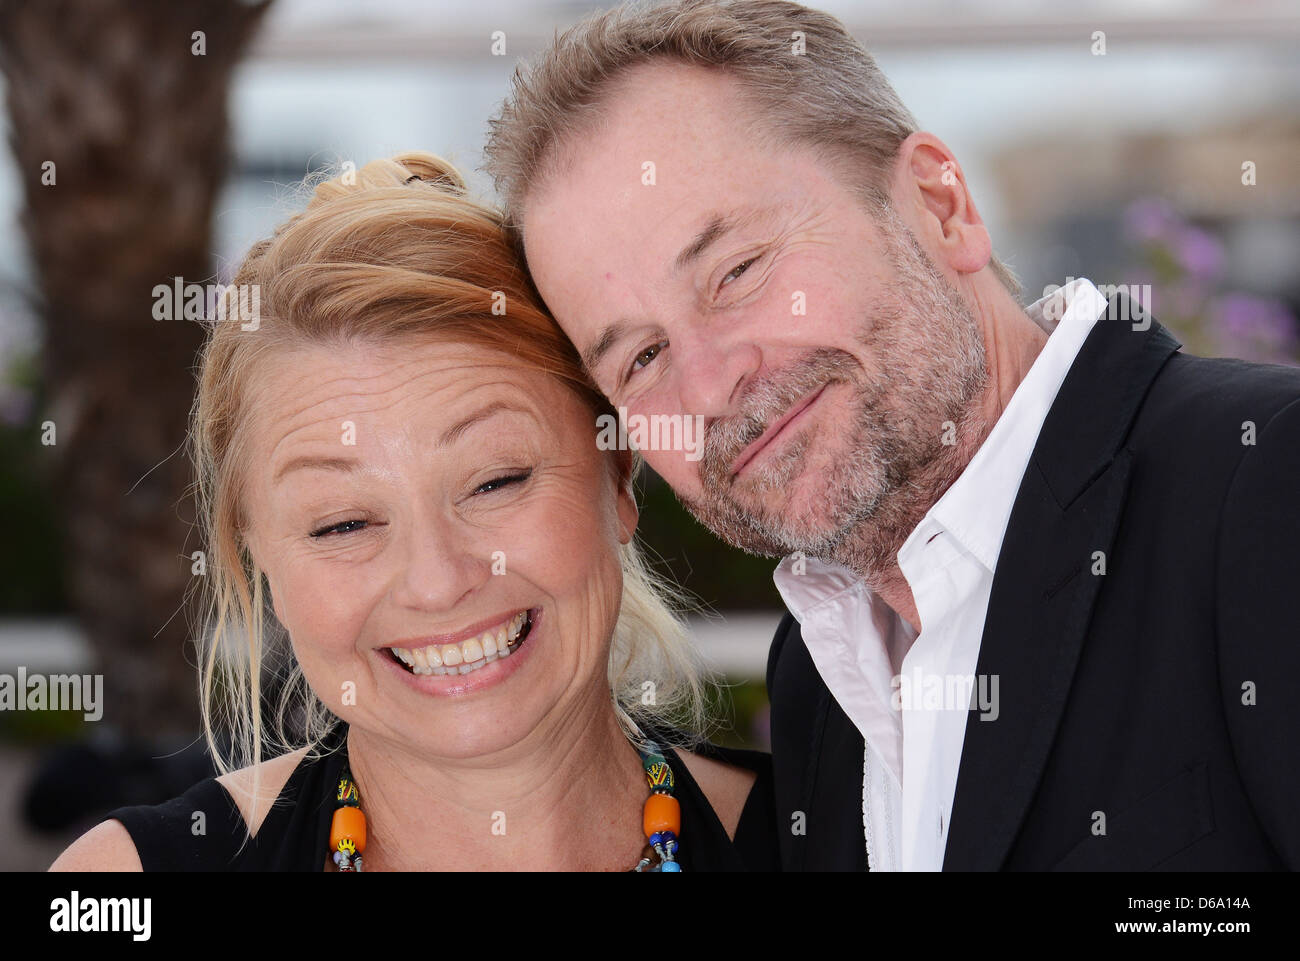 Margarethe Tiesl and Ulrich Seidl 'Paradies' photocall during the 65th annual Cannes Film Festival Cannes, France - 18.05.12 Stock Photo